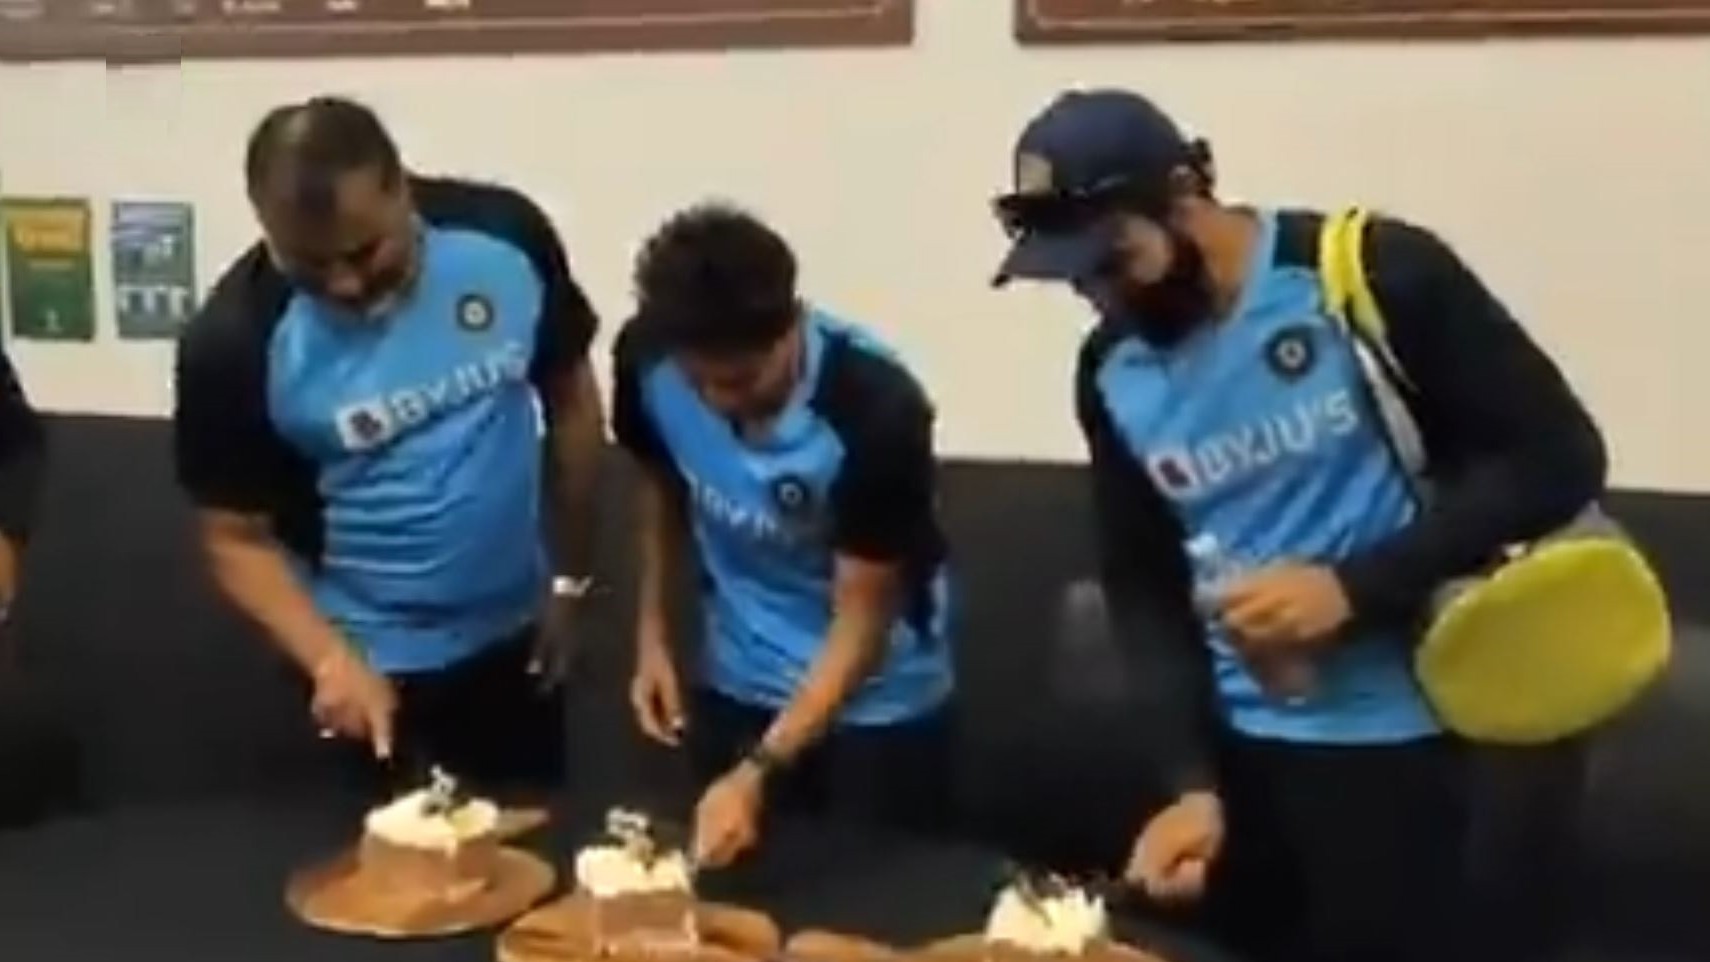 AUS v IND 2020-21: WATCH- Fit-again Jadeja celebrates birthday with Kuldeep and B Arun after joining Test squad